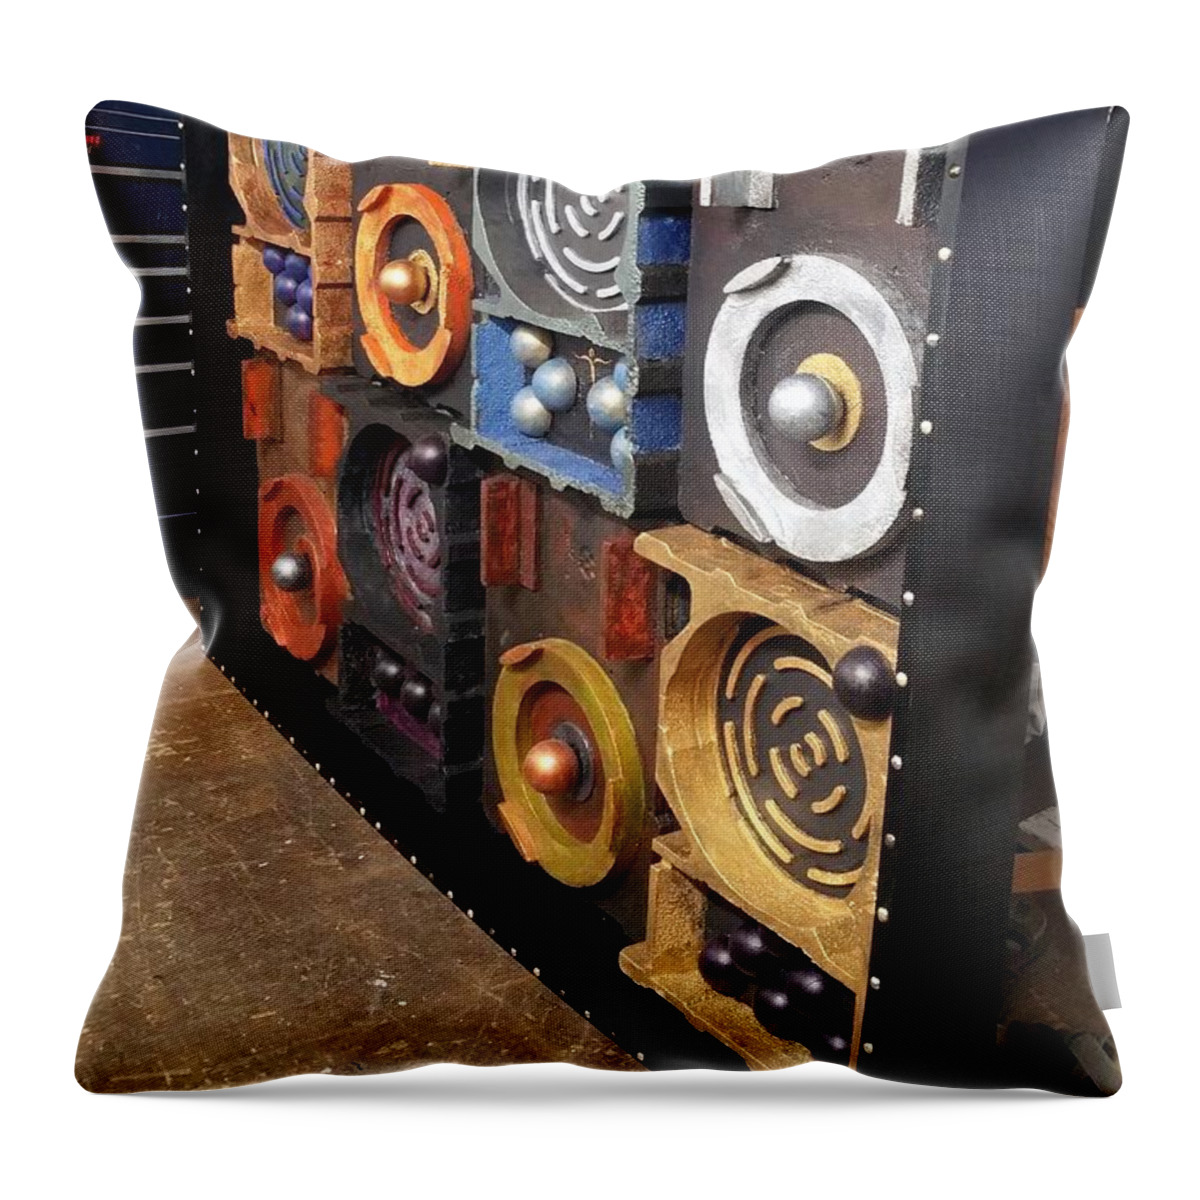  Throw Pillow featuring the painting Prodigy by James Lanigan Thompson MFA